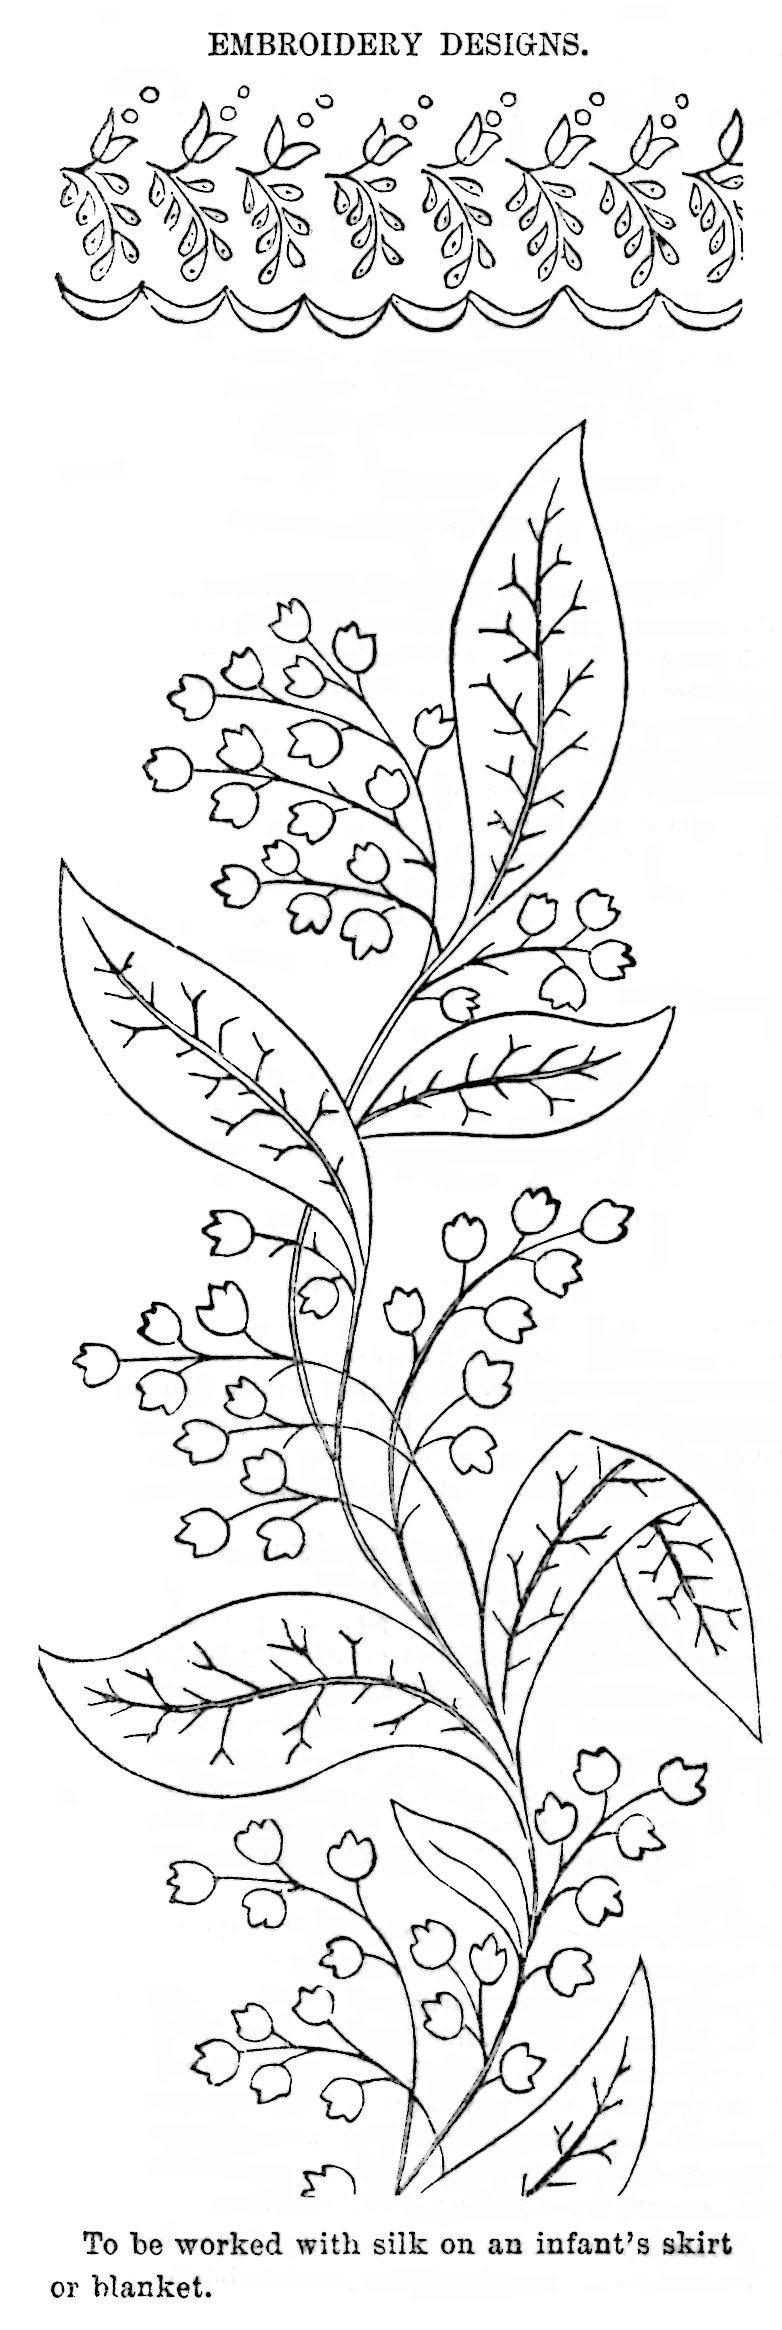 Lily of the Valley Pattern for Silk Embroidery - Vintage Crafts and More